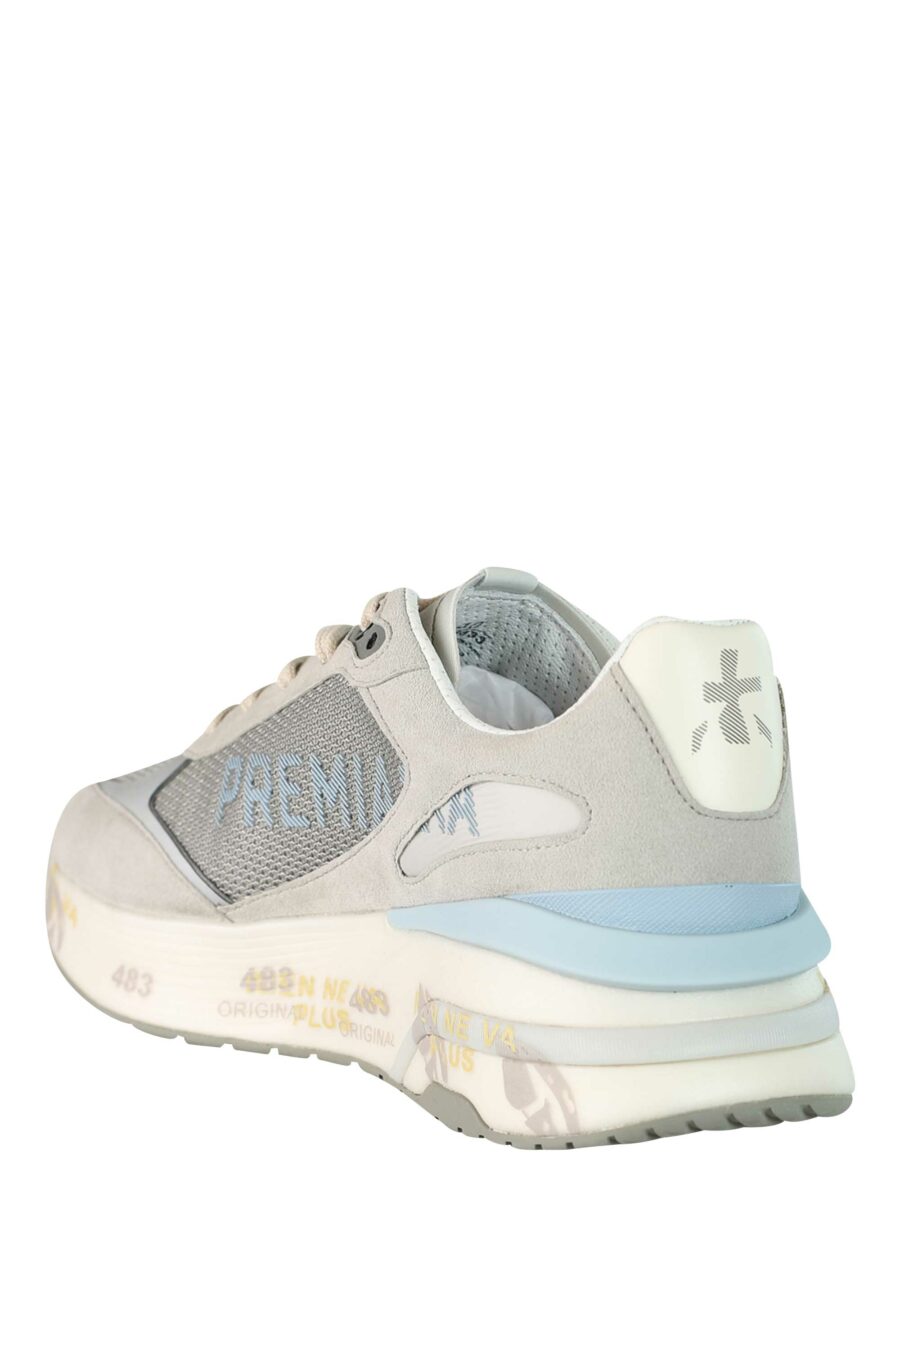 Grey trainers with sky blue "moe run 6333" - 8058326252810 4